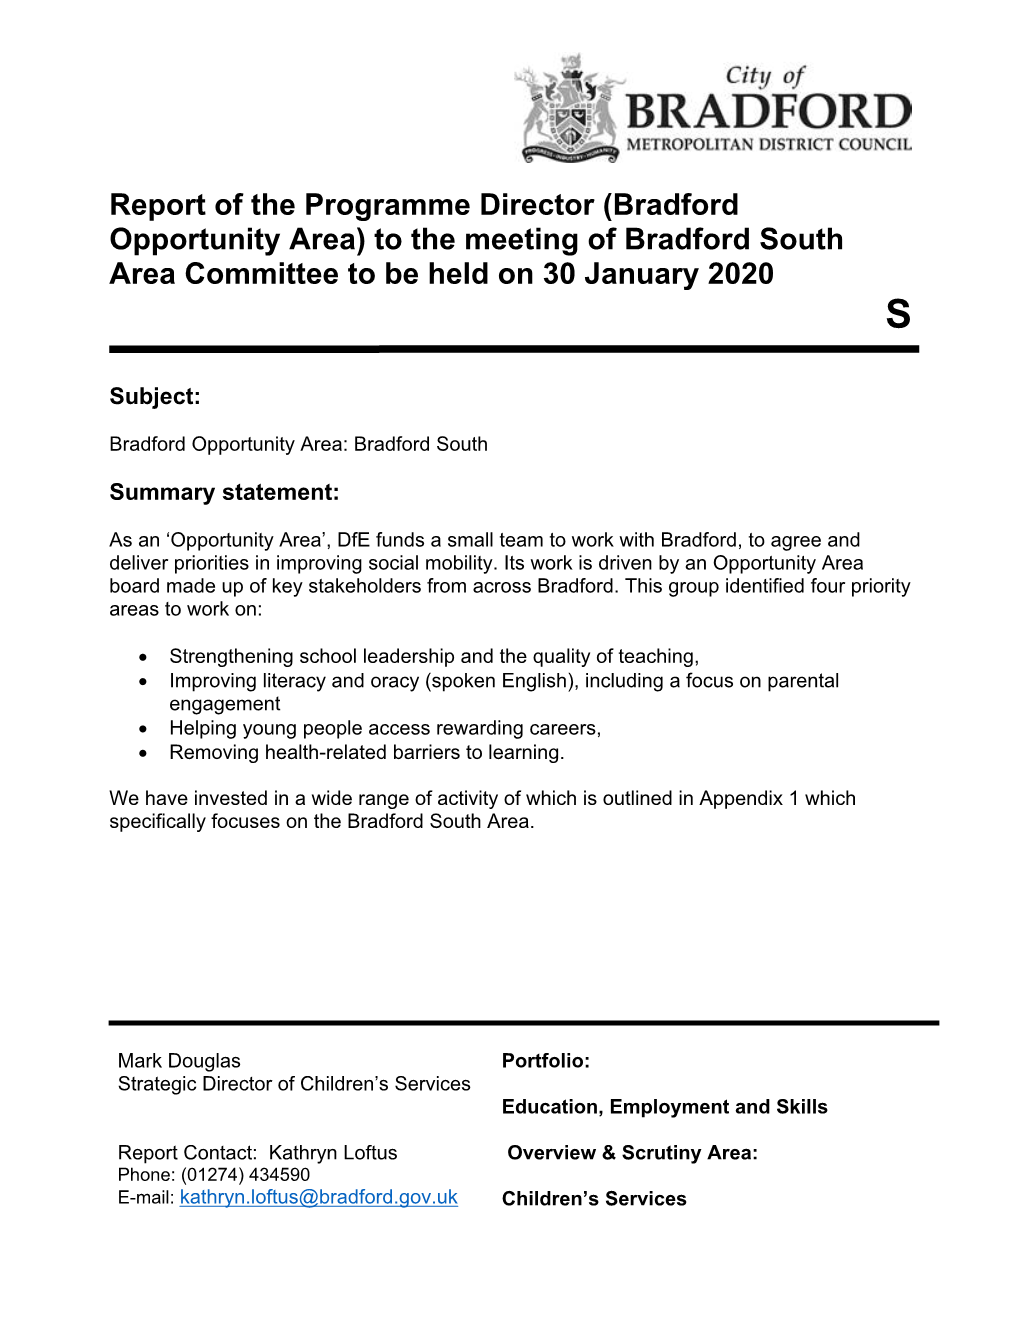 Report of the Programme Director (Bradford Opportunity Area) to the Meeting of Bradford South Area Committee to Be Held on 30 January 2020 S